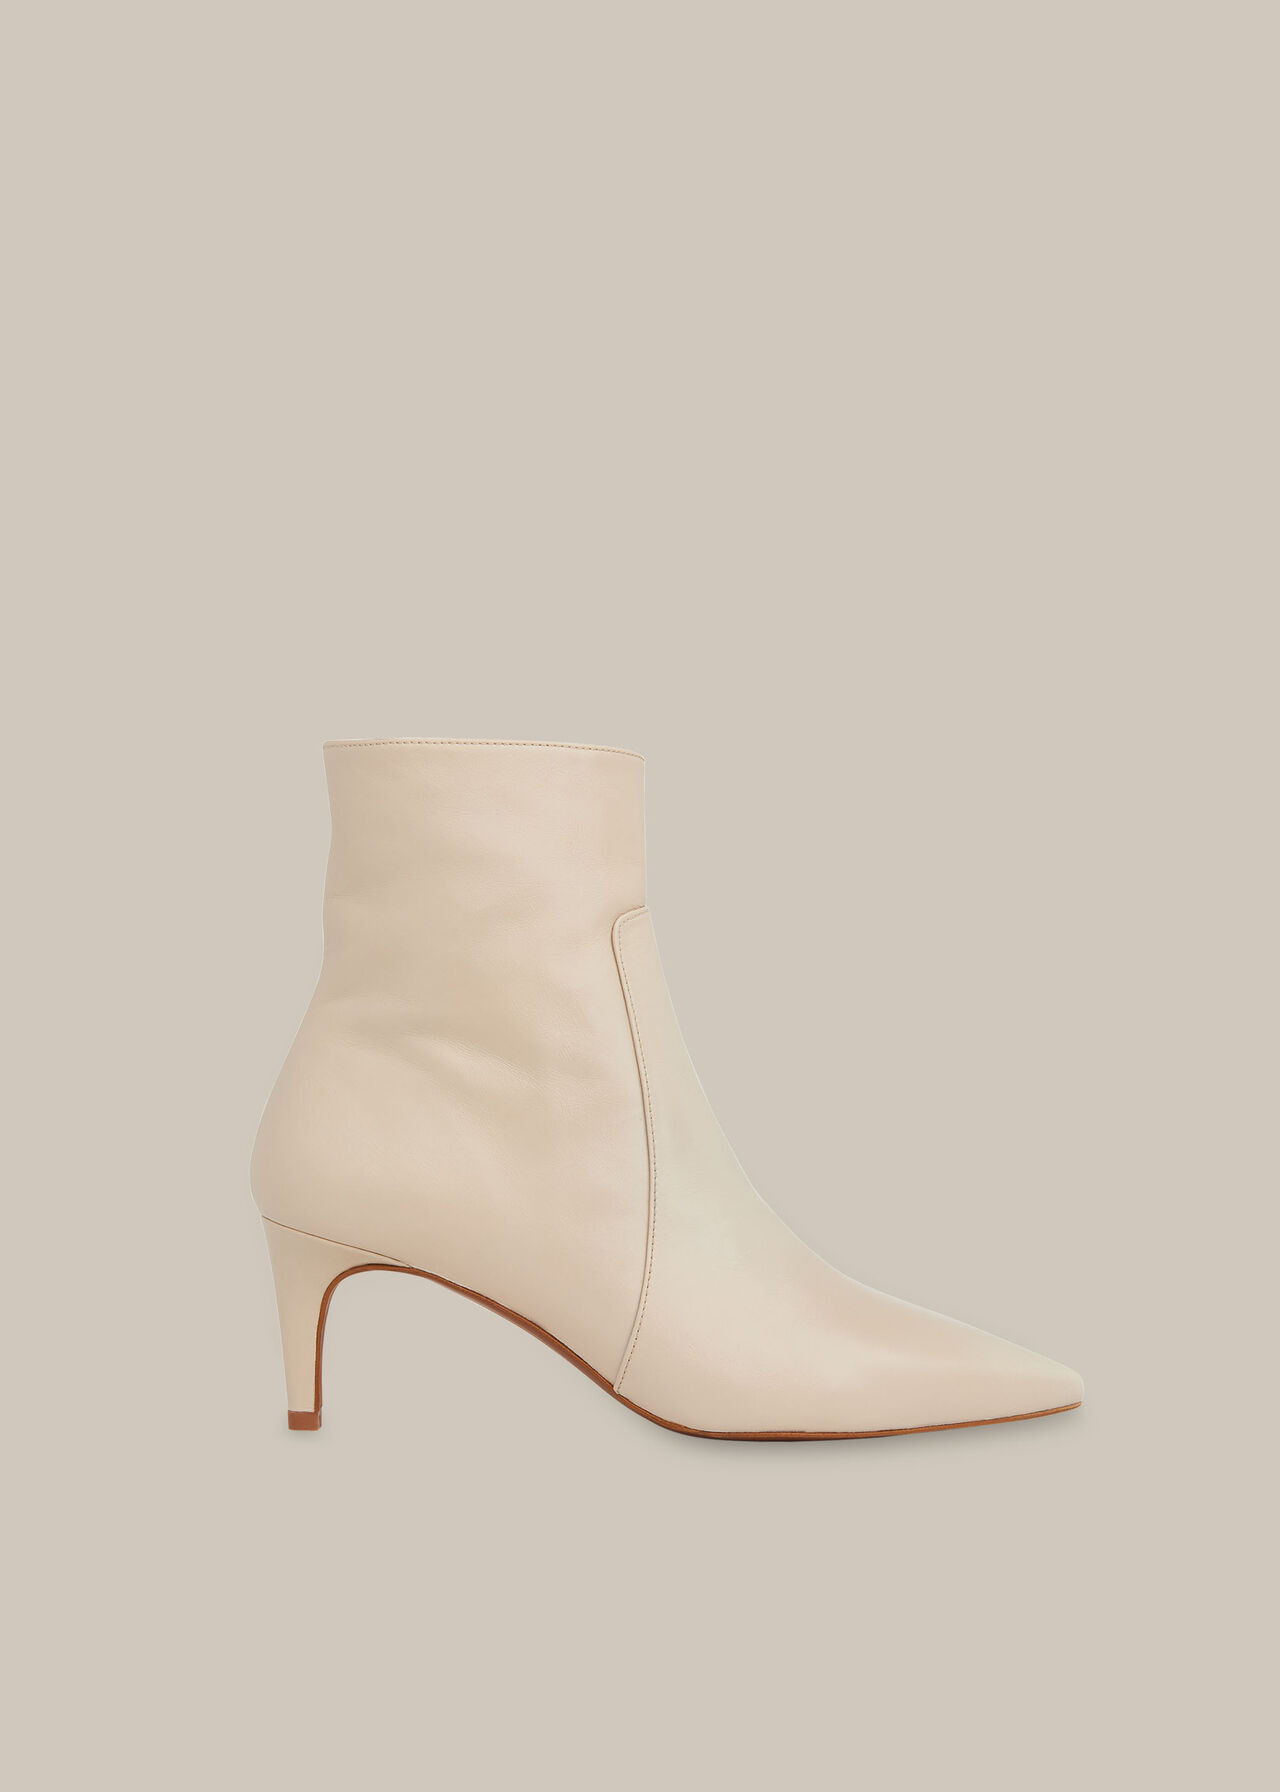 JUNE HIGH ANKLE BOOTS OFF WHITE LEATHER - Jo Mercer